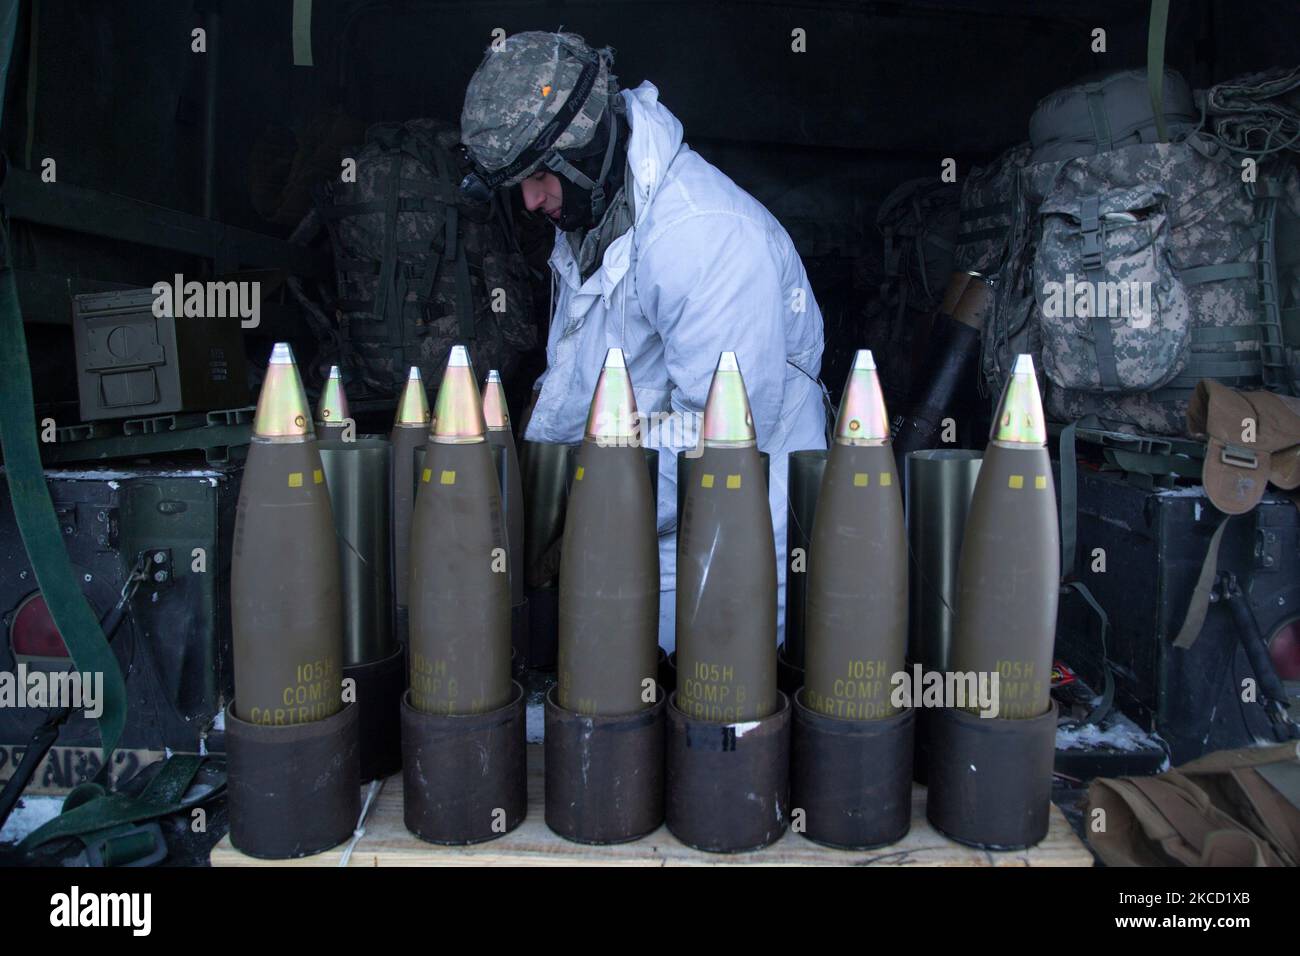 A paratrooper prepares 105mm high explosive rounds. Stock Photo